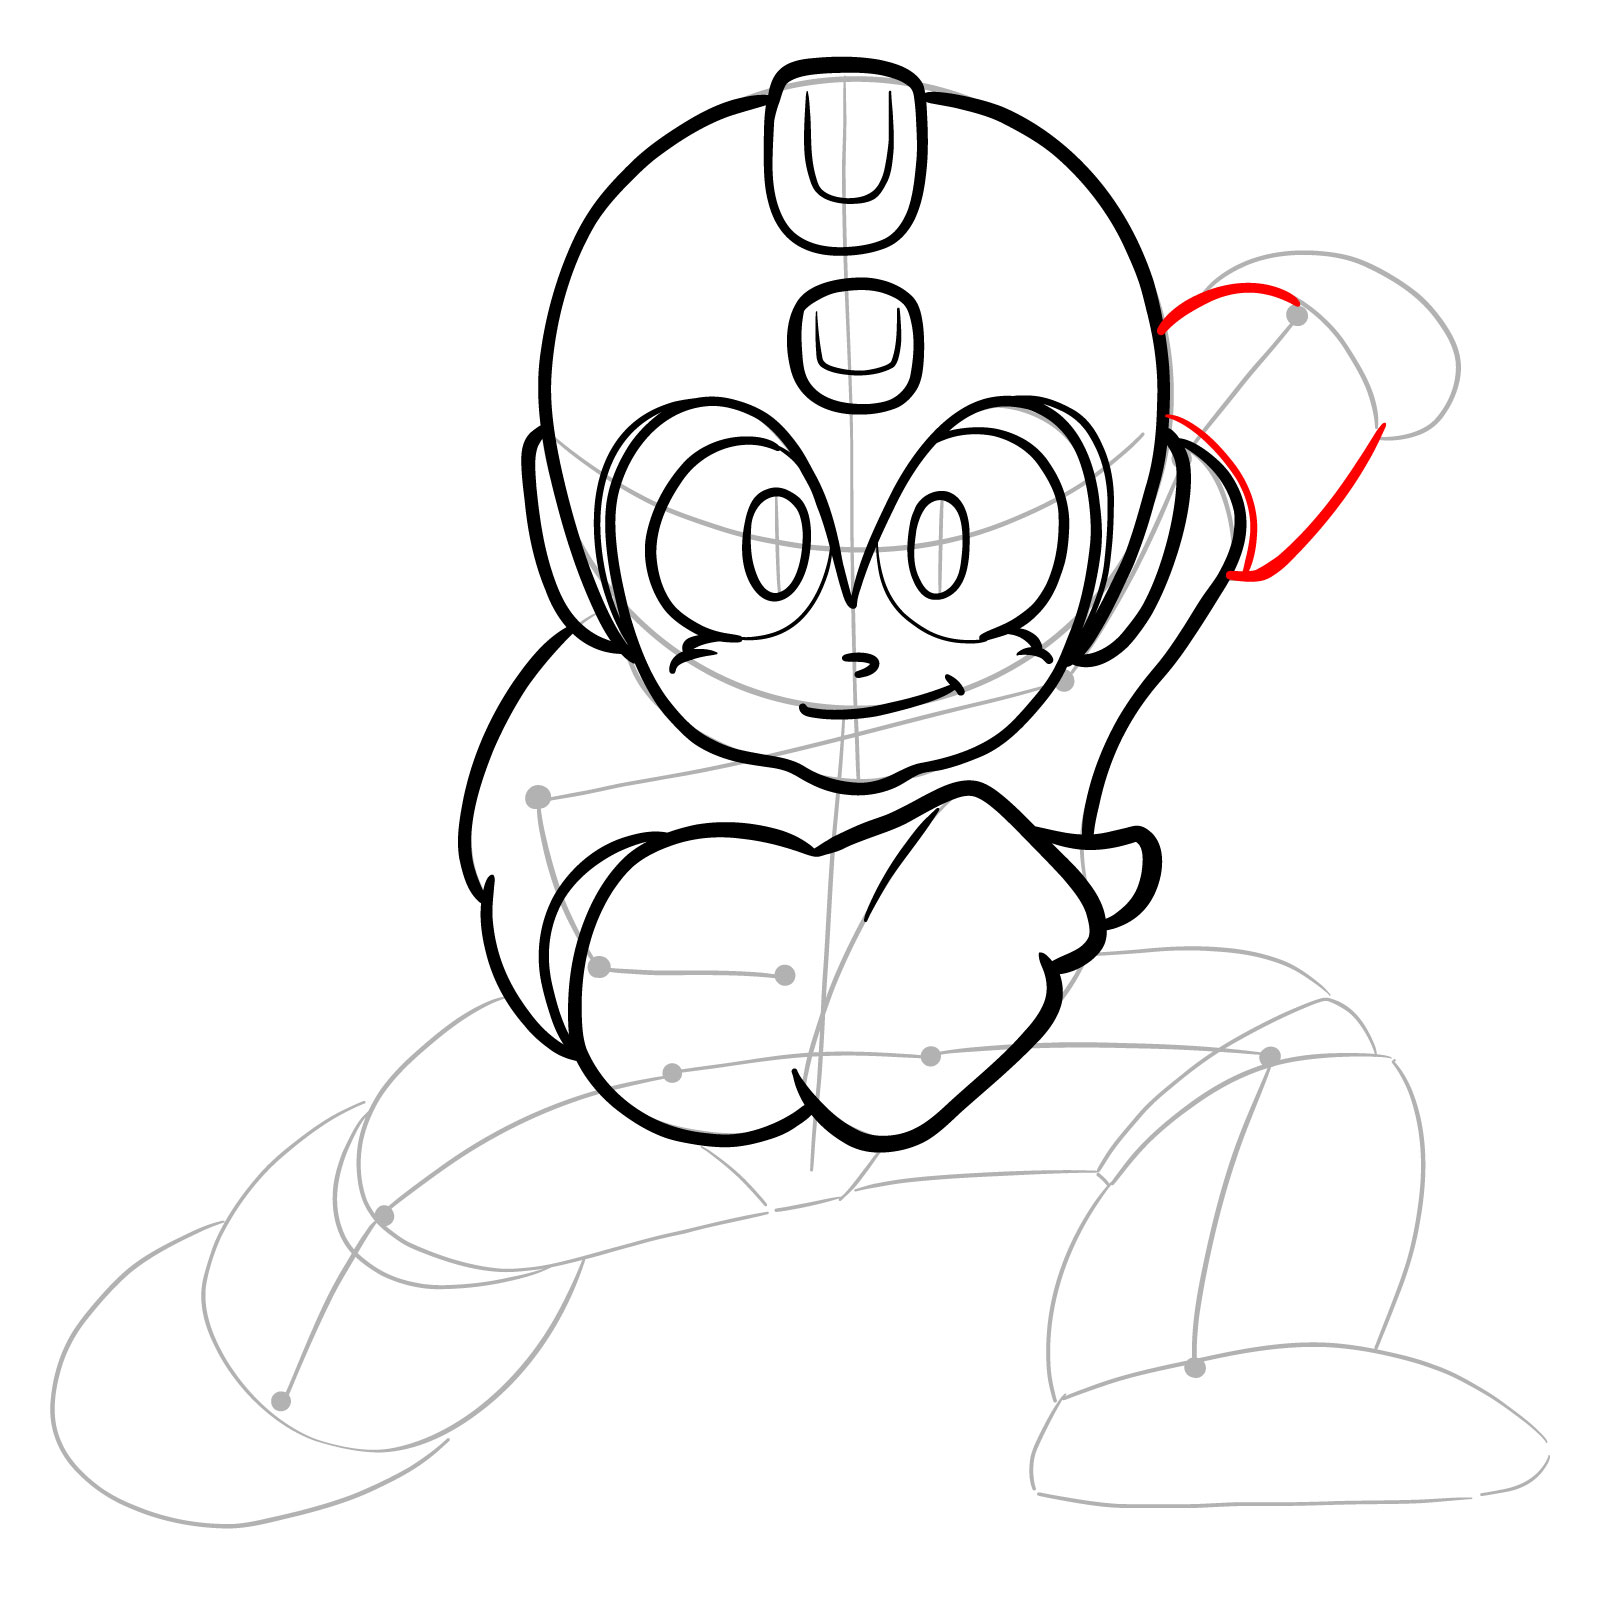 How to draw Mega Man from the original game - step 16